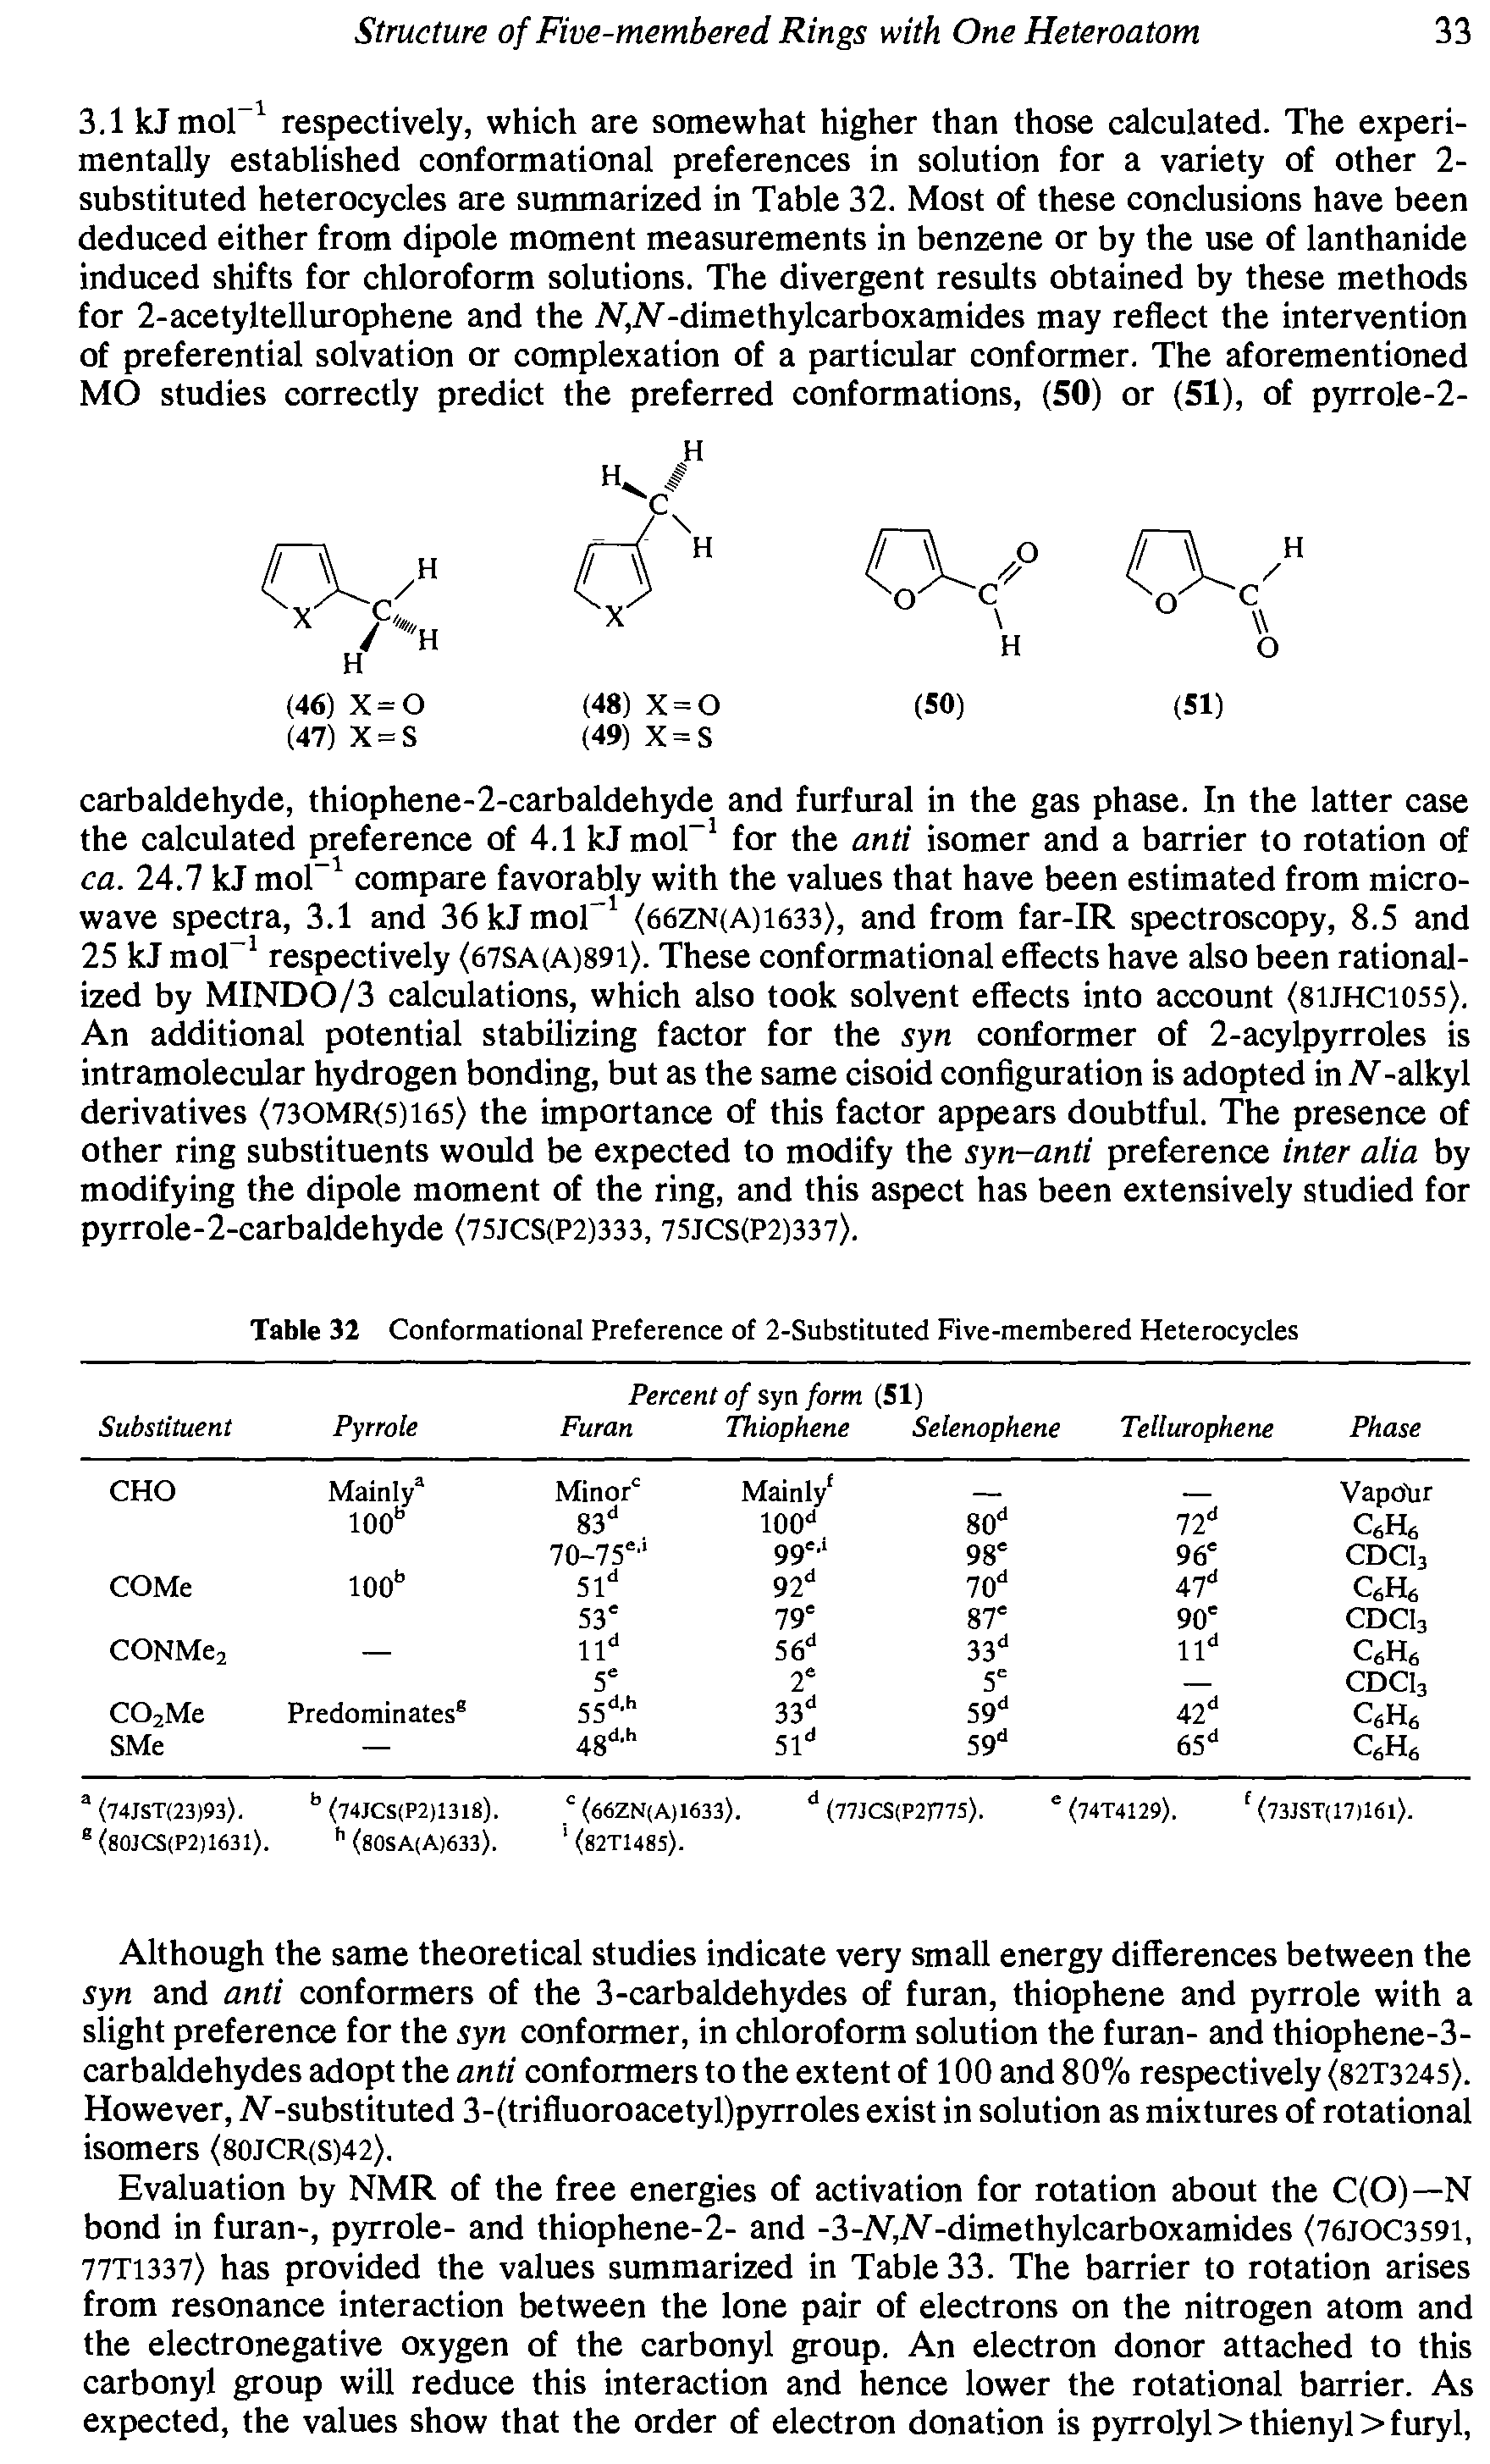 Table 32 Conformational Preference of 2-Substituted Five-membered Heterocycles...